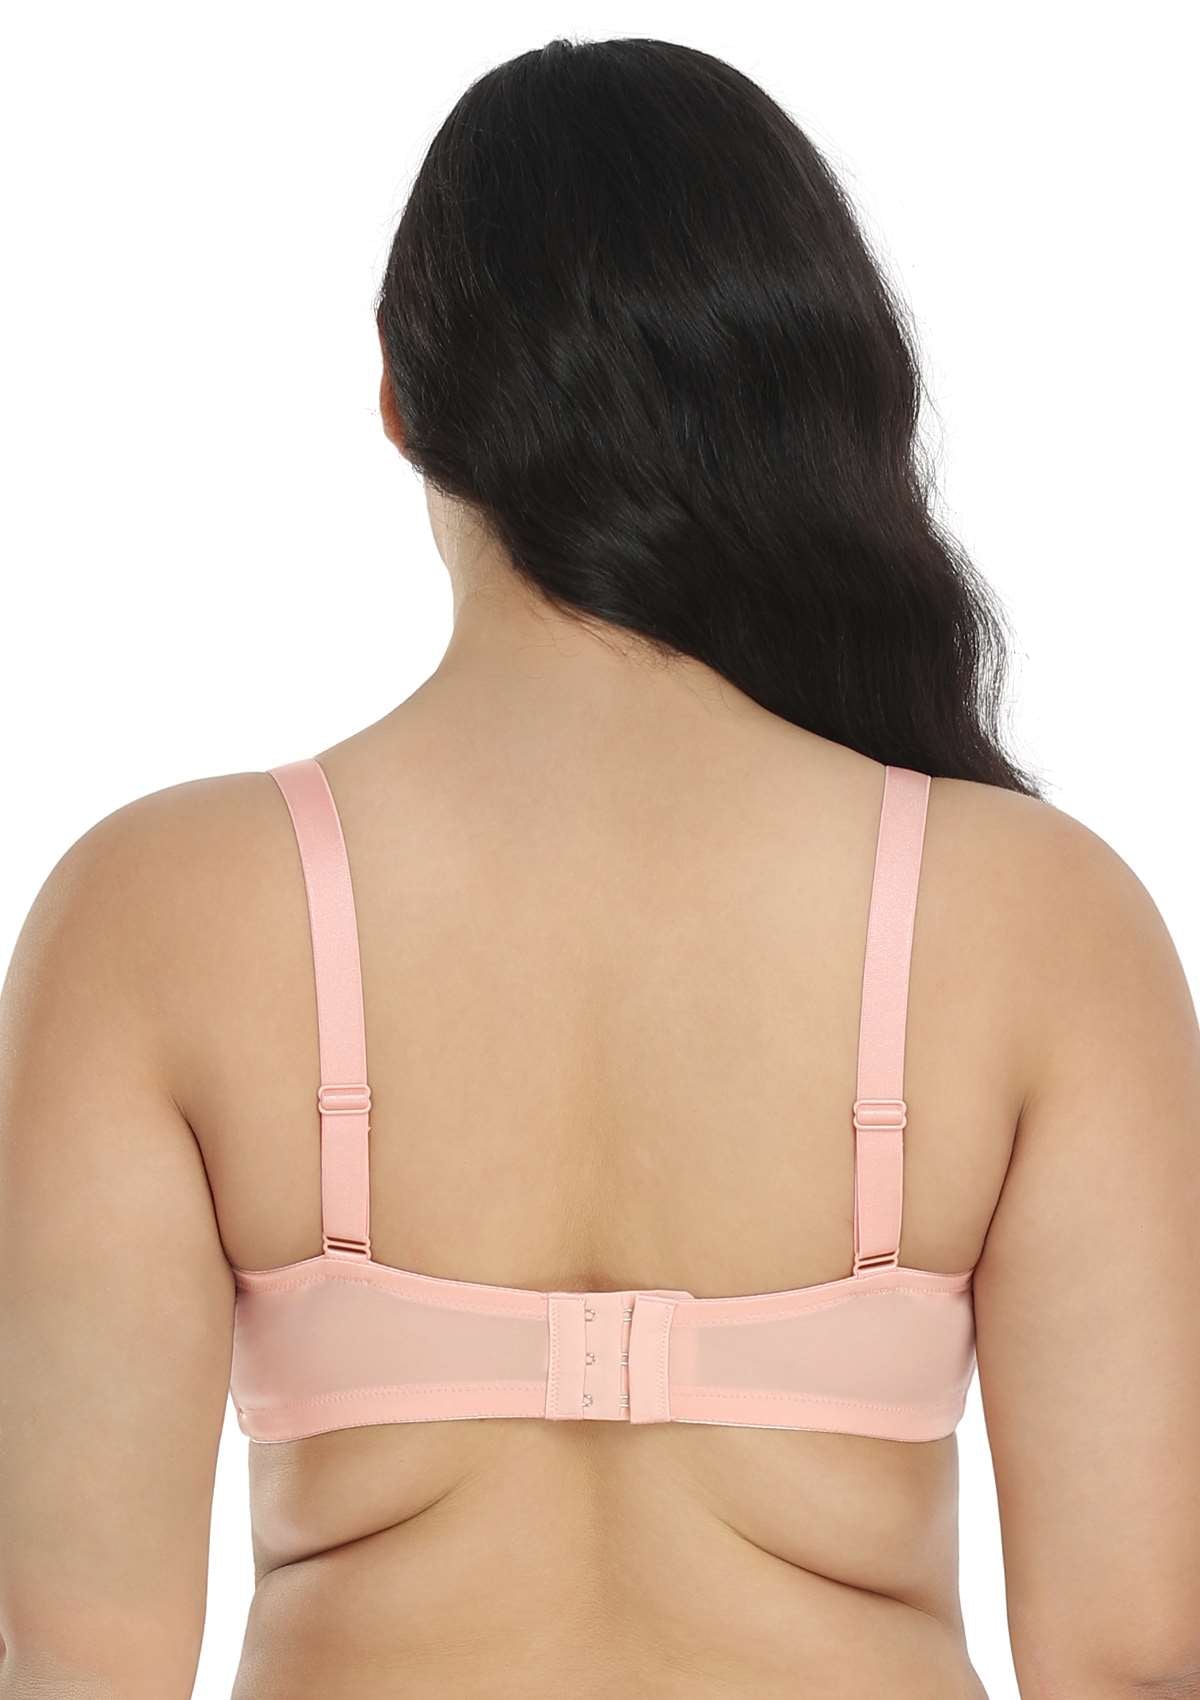 HSIA Rosa Bonica Sheer Lace Mesh Unlined Thin Comfy Woman Bra - Pink / 42 / DDD/F